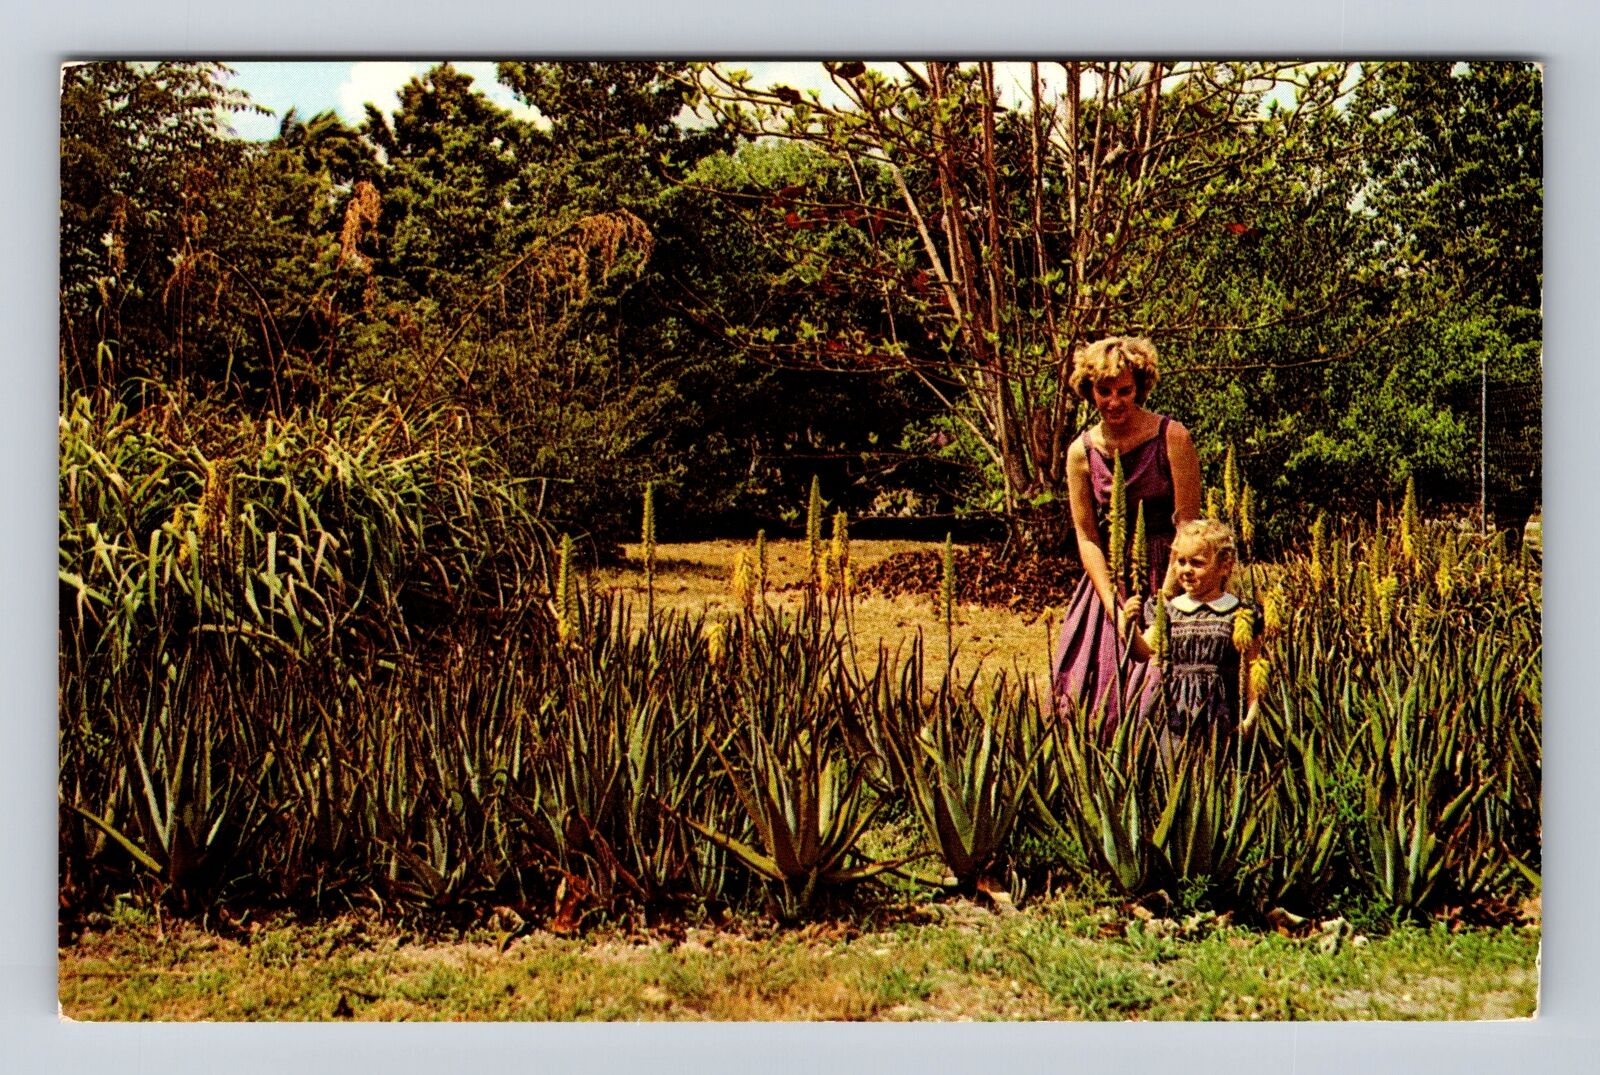 Redlands CA-California, Plant Of Ages Blooms At Dade County, Vintage Postcard